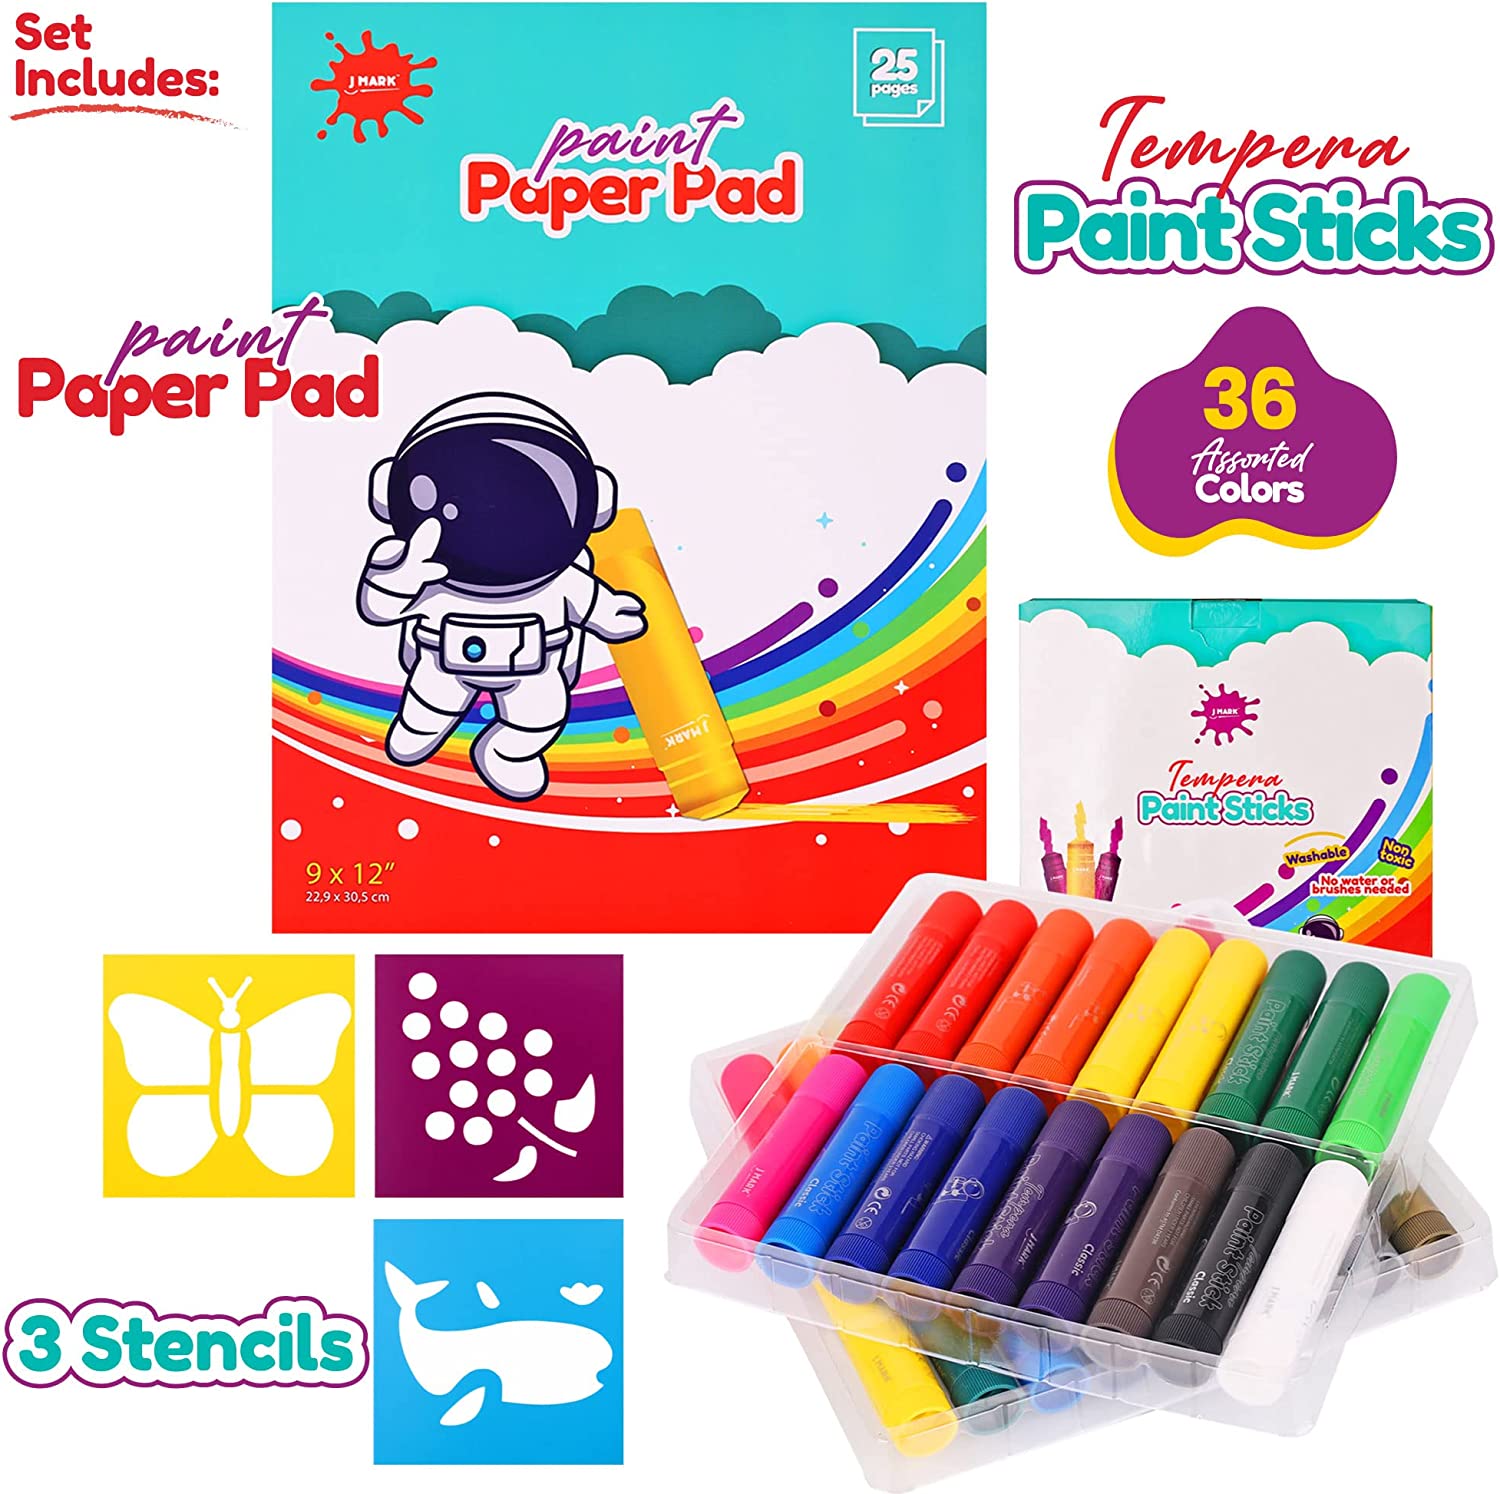 J Mark Tempera Paint Sticks, 36 Colors - Including Stencils and Painting Book, Set of Washable Paint Crayons for Kids - Non Toxic Solid Paint Markers